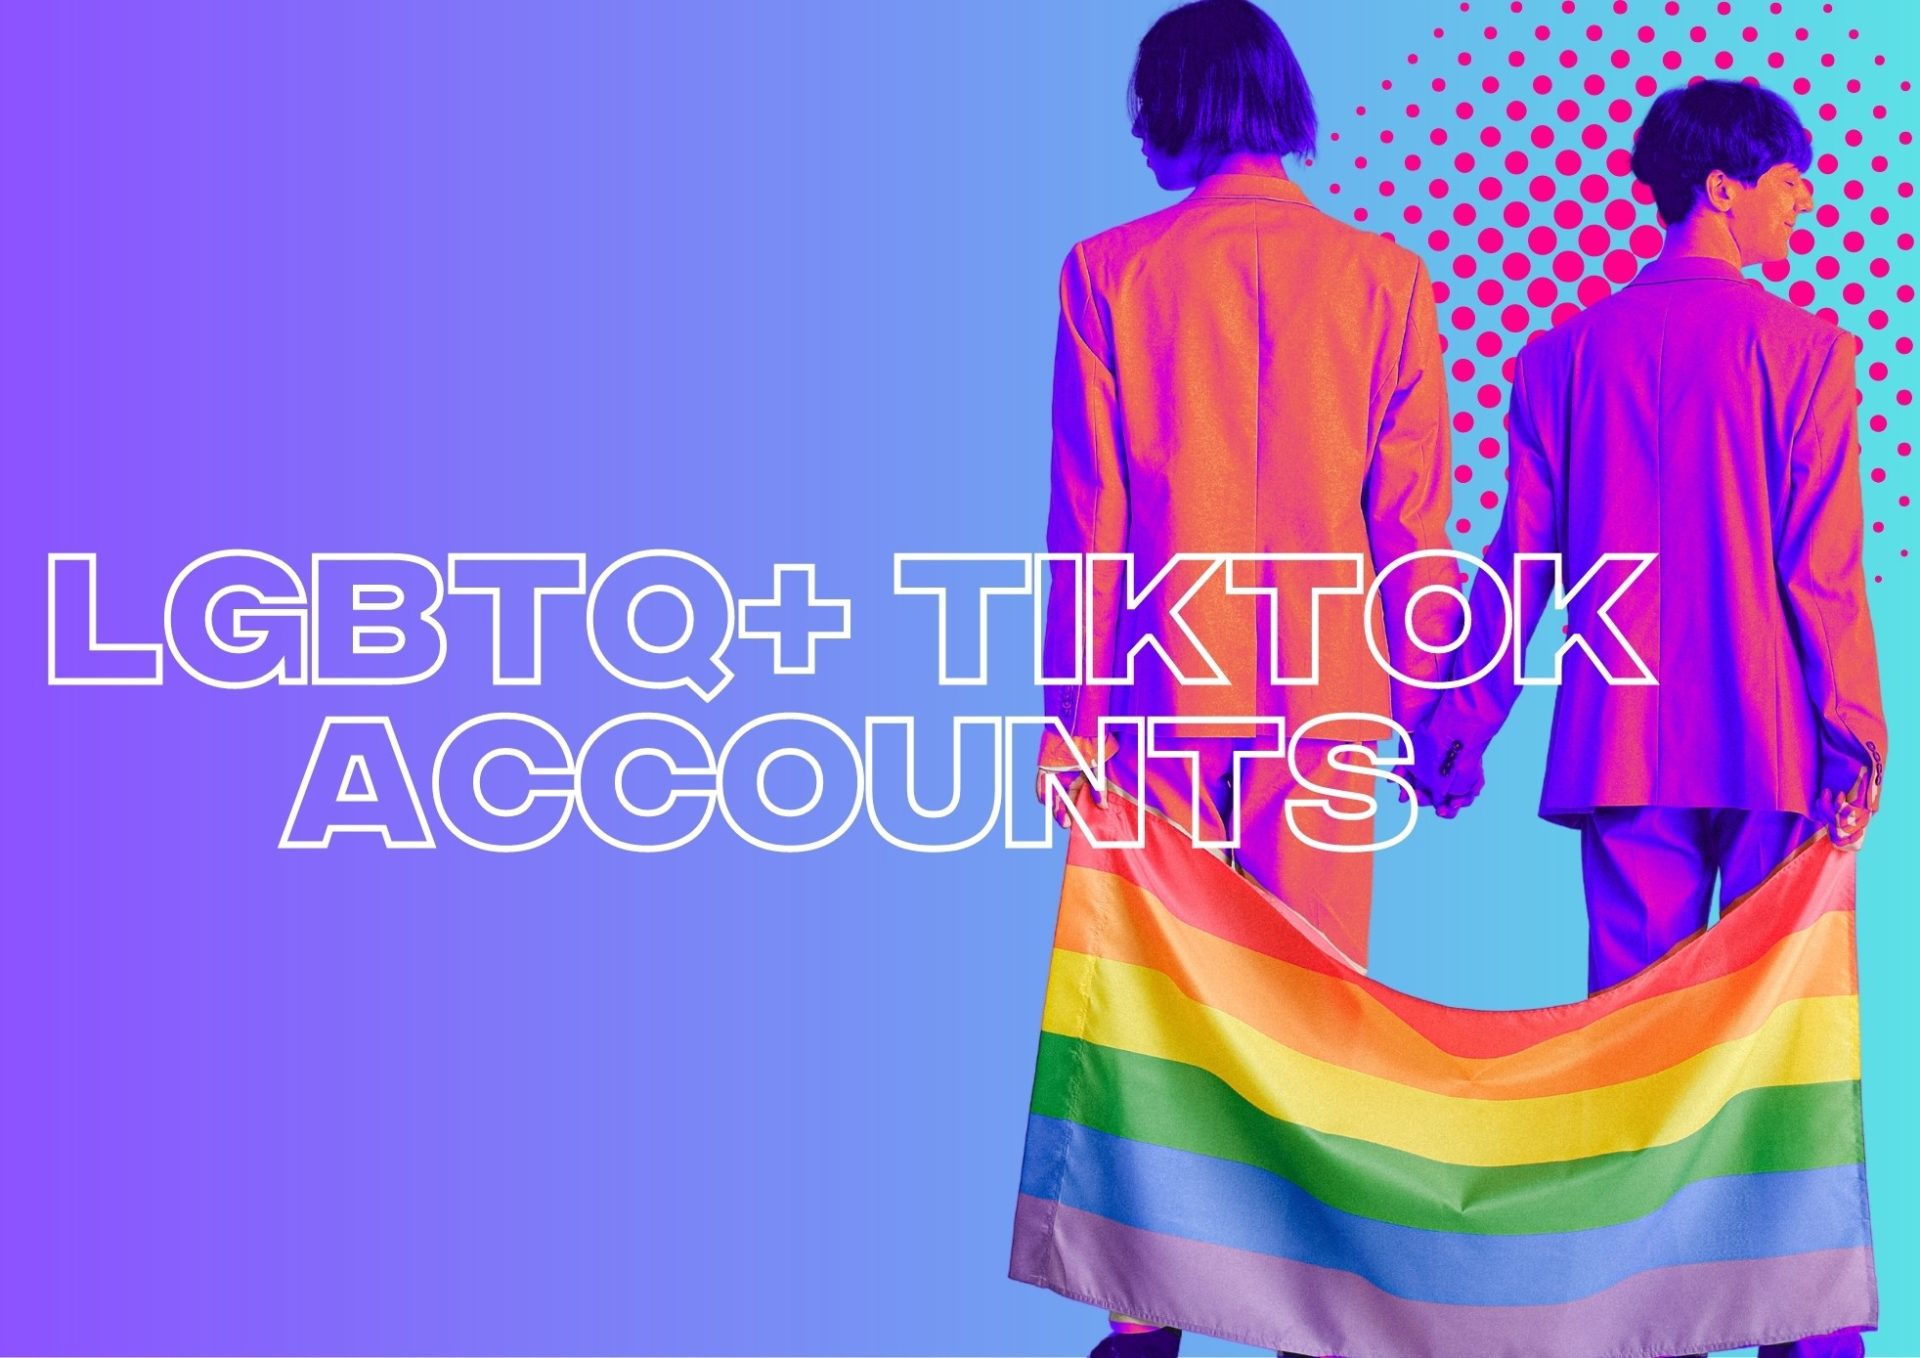 The Most Followed TikTok Accounts Advocating For LGBTQ+ Rights